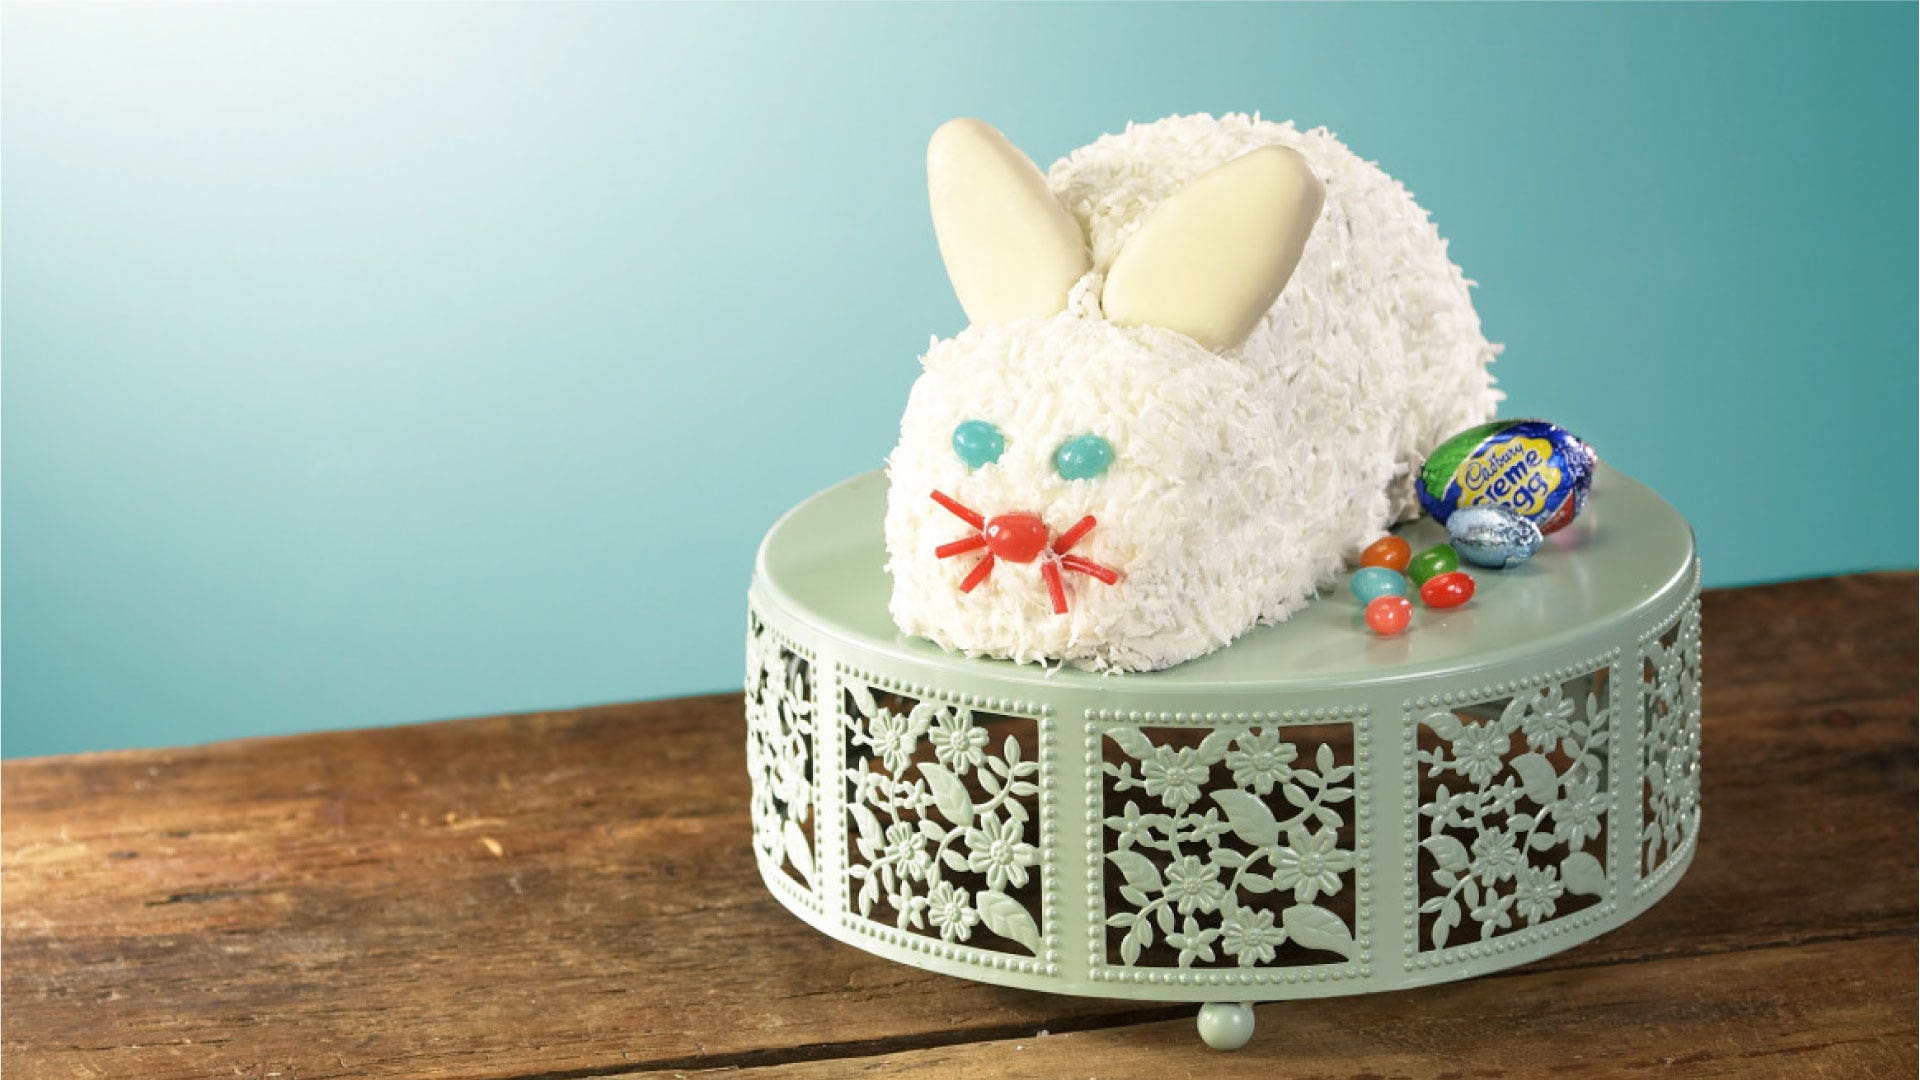 Make the Cutest Easter Bunny Cake: A FREE Tutorial | Craftsy |  www.craftsy.com